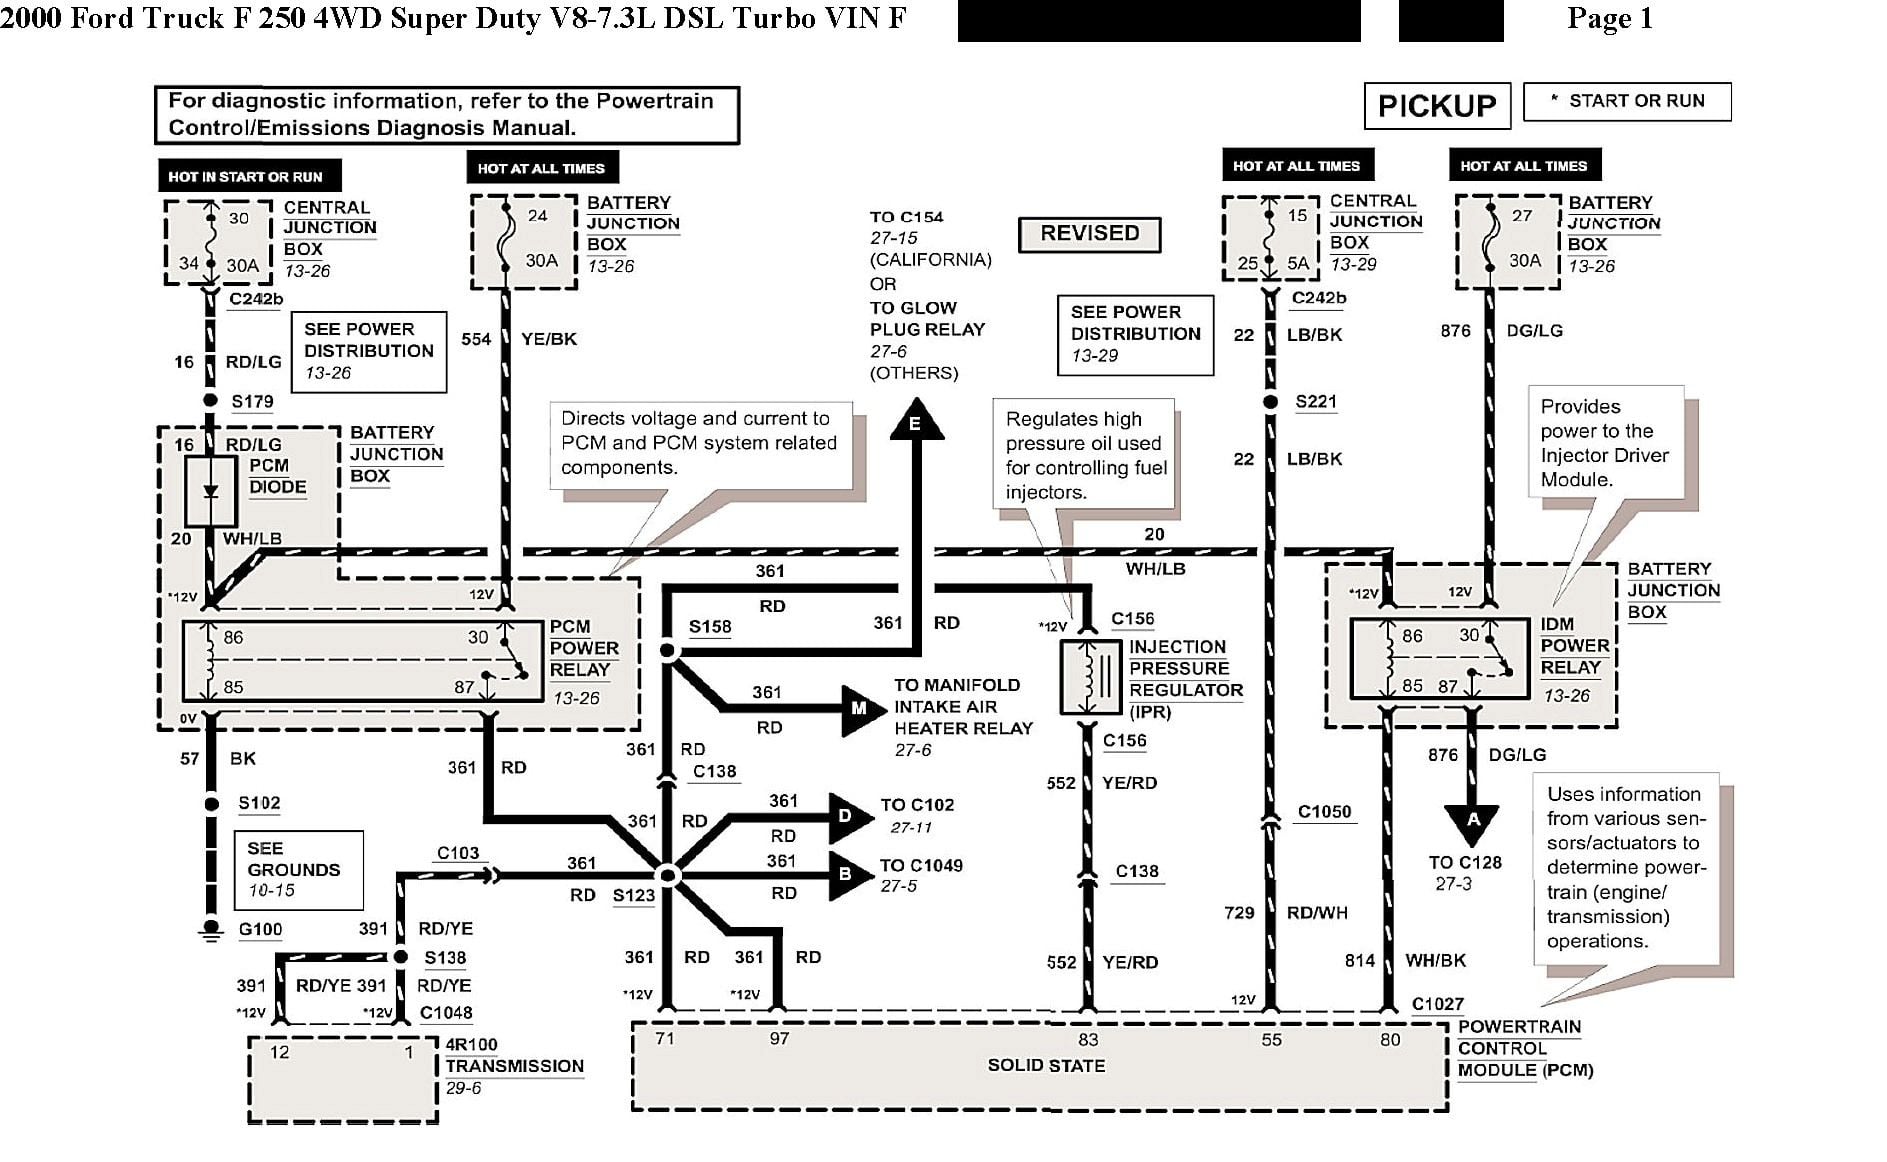 Need IPR wiring info-diagram, quickly please (2000) - Ford Truck  Enthusiasts Forums  2005 Ford 6.0 Ipr Wiring Diagram    Ford Truck Enthusiasts